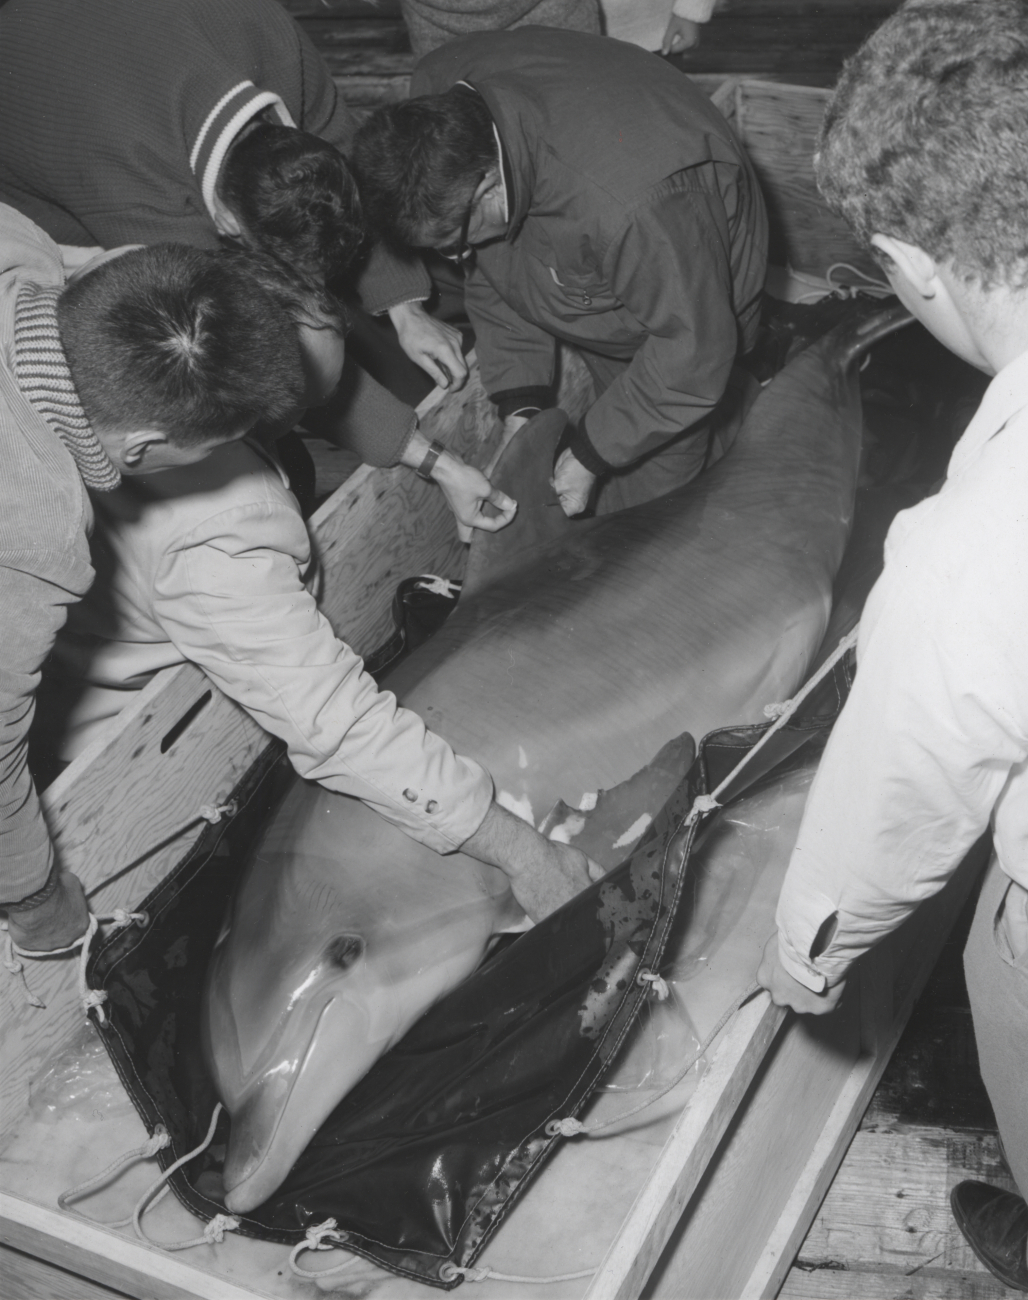 Tagging porpoise